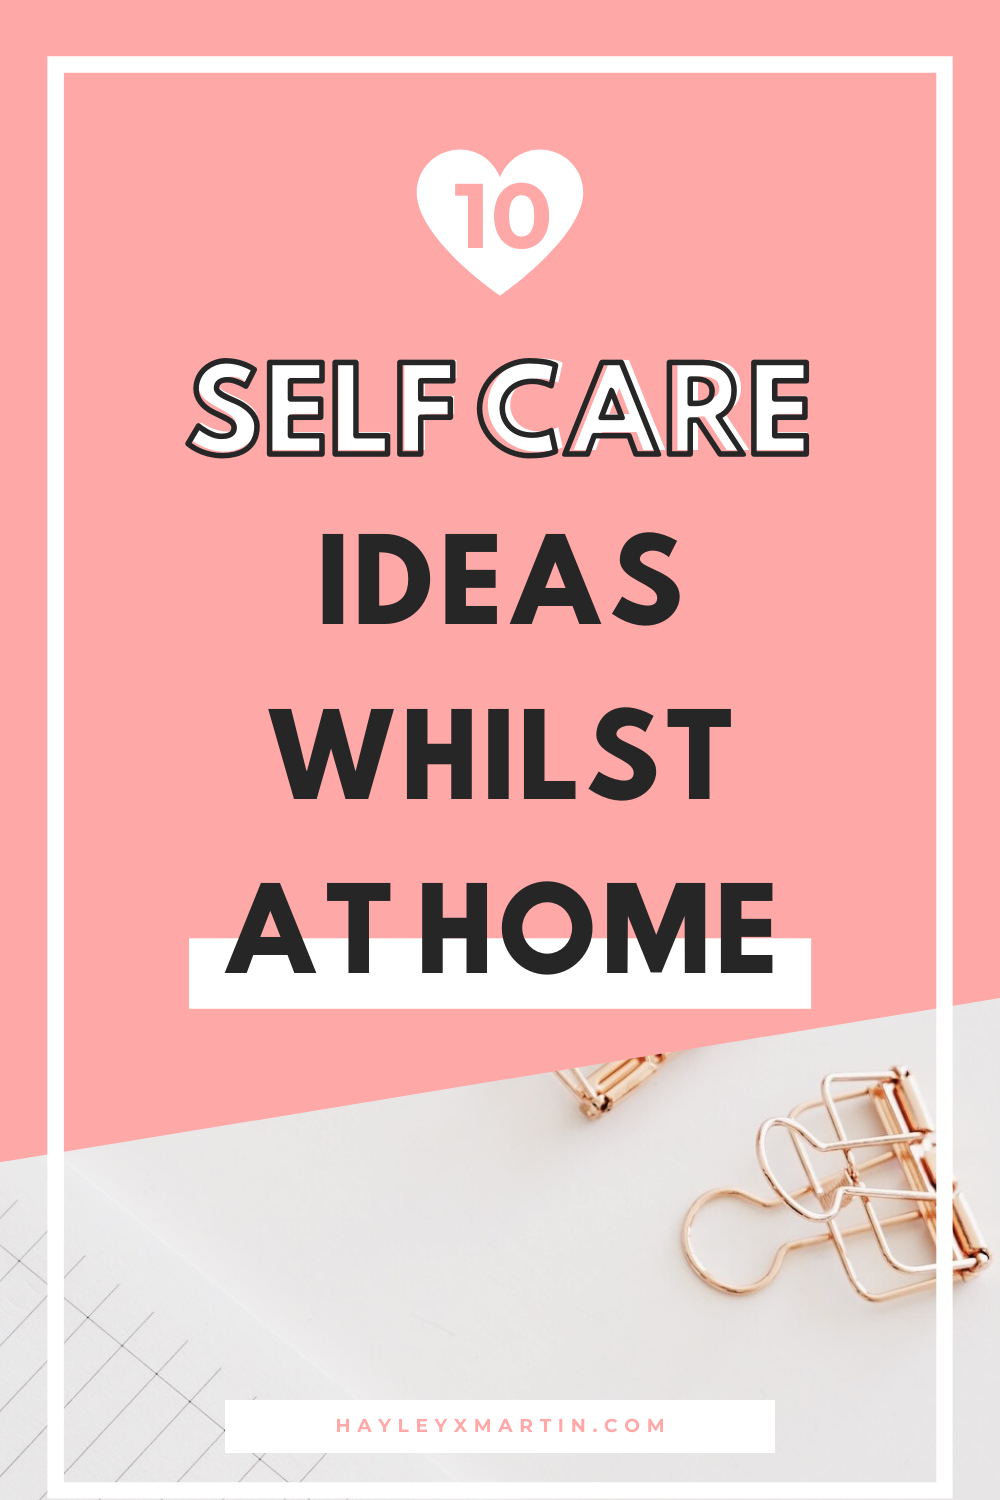 10 self care ideas whilst stuck at home | hayleyxmartin